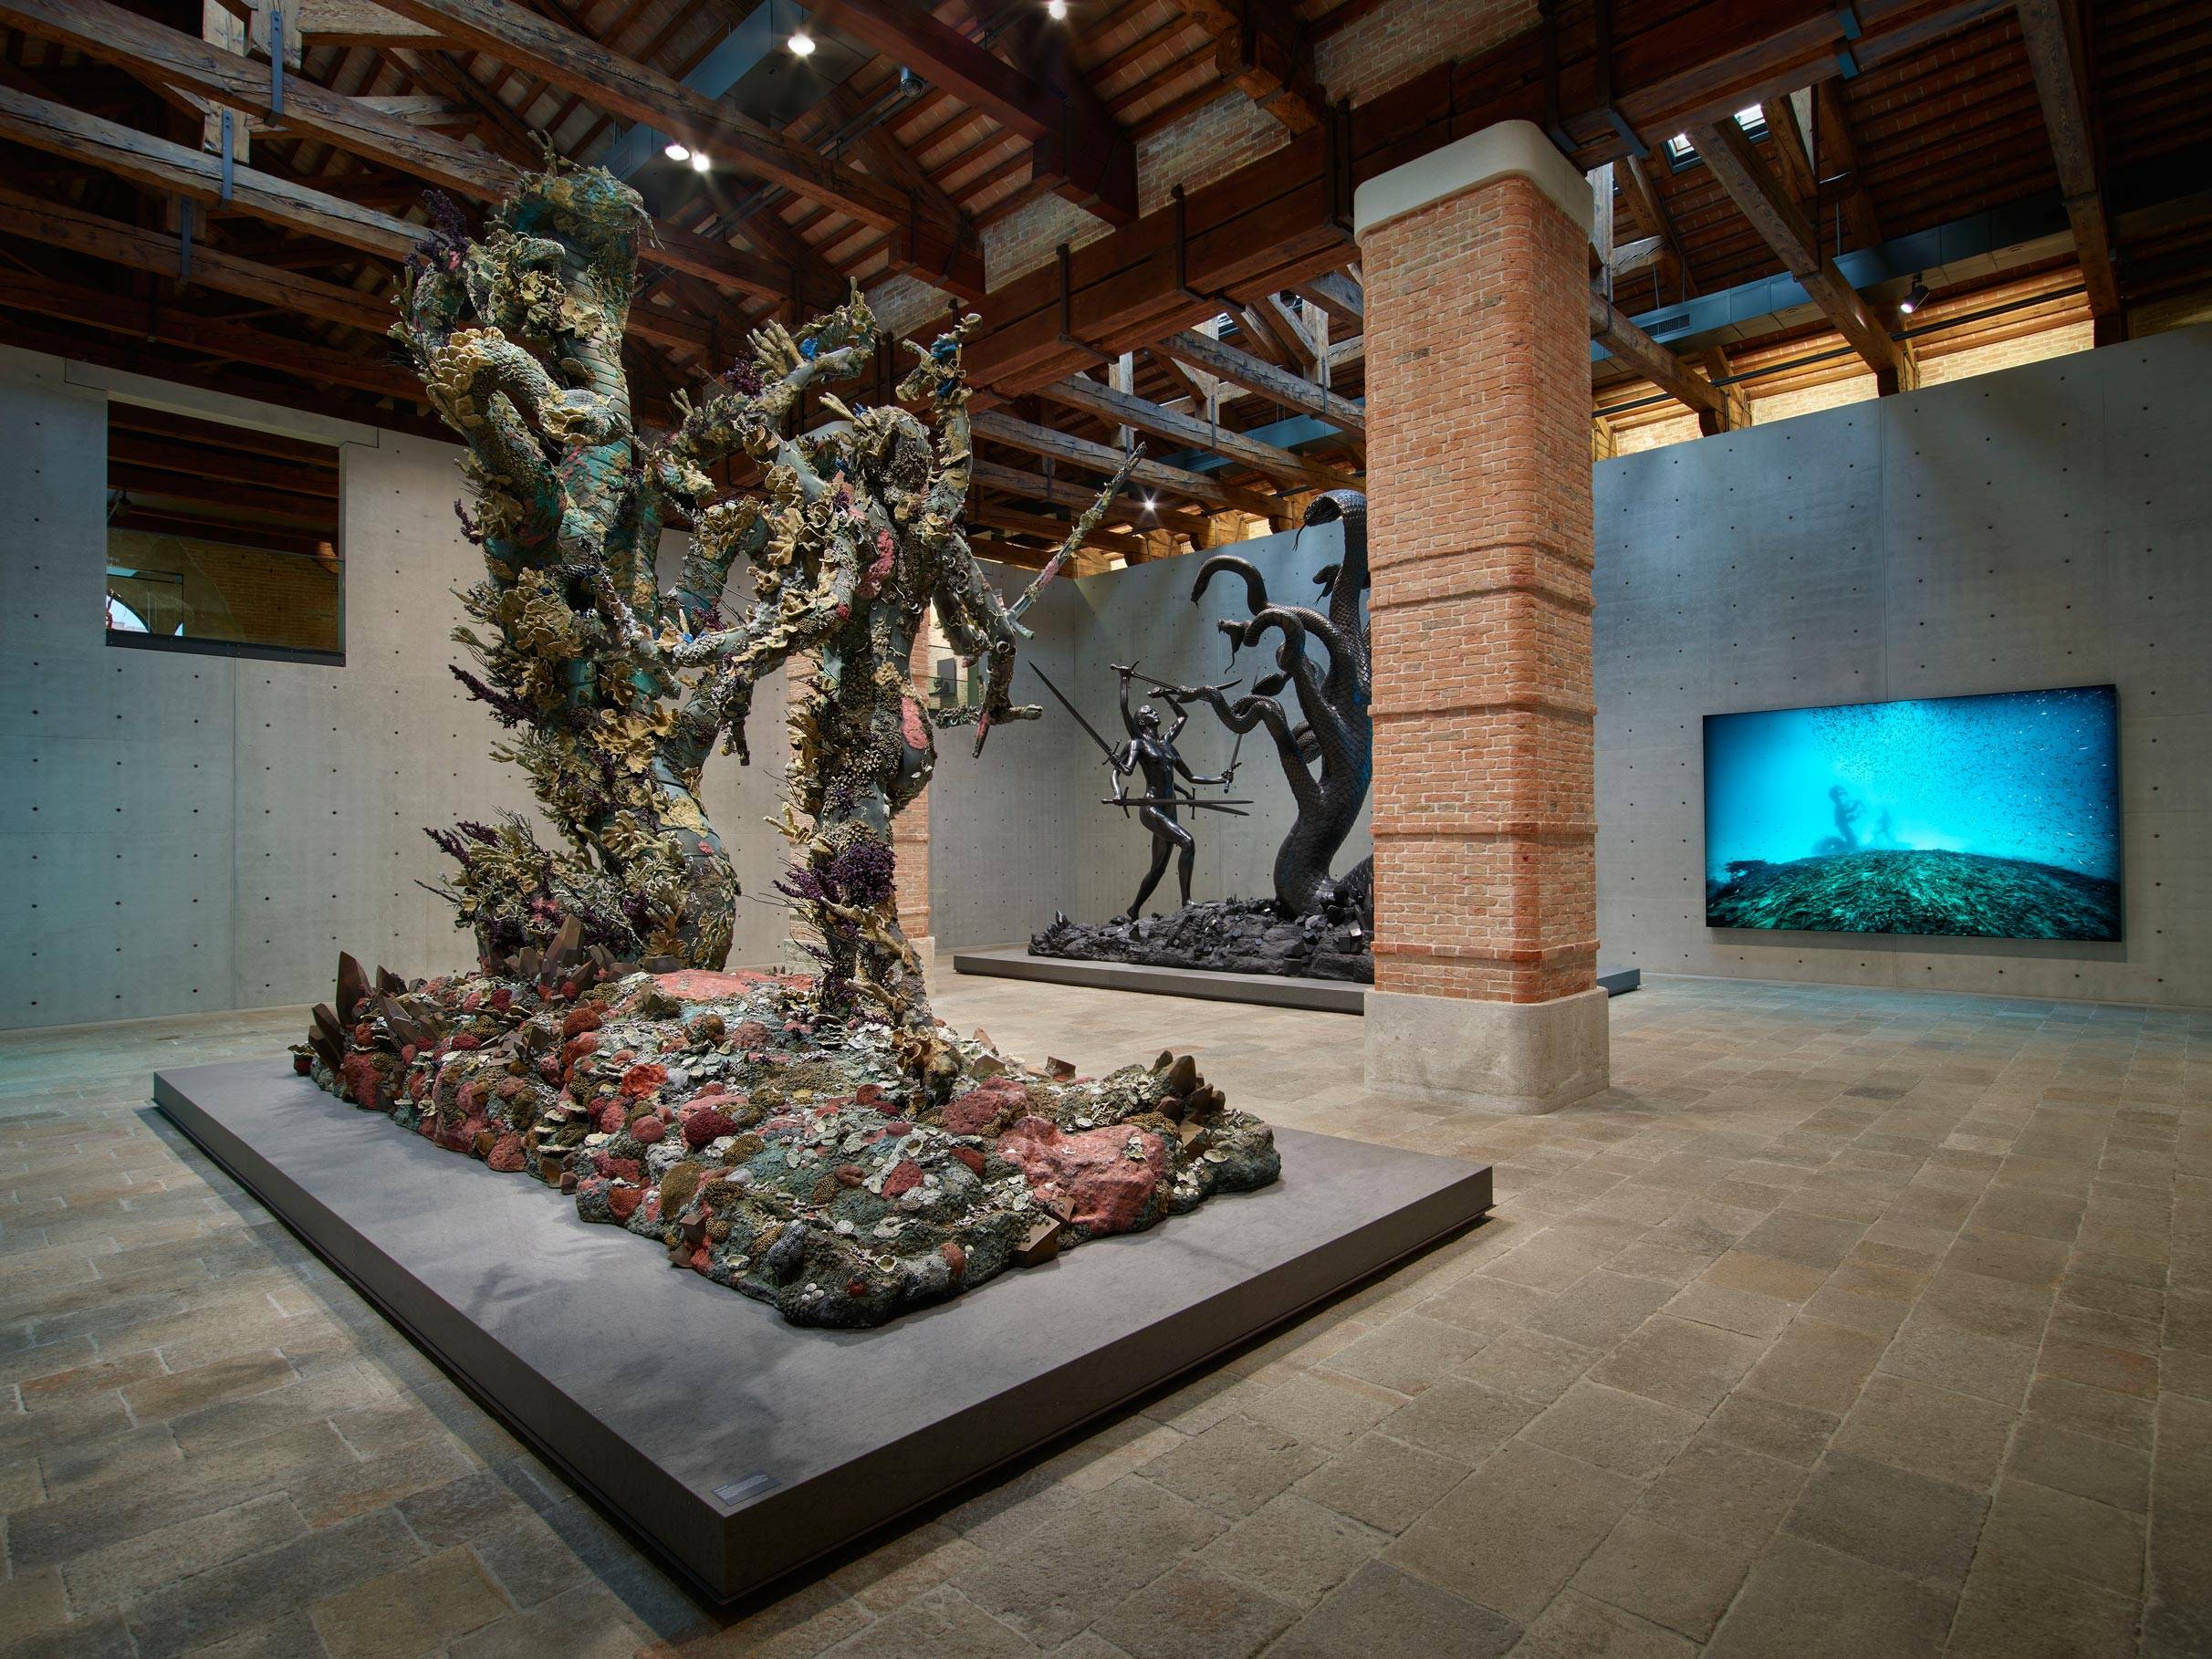 Room 11:
(left to right)
Damien Hirst, Hydra and Kali (two versions), Hydra and Kali Beneath the Waves (photography
Christoph Gerigk). Photographed by Prudence Cuming Associates © Damien Hirst and Science Ltd.
All rights reserved, DACS/SIAE 2017